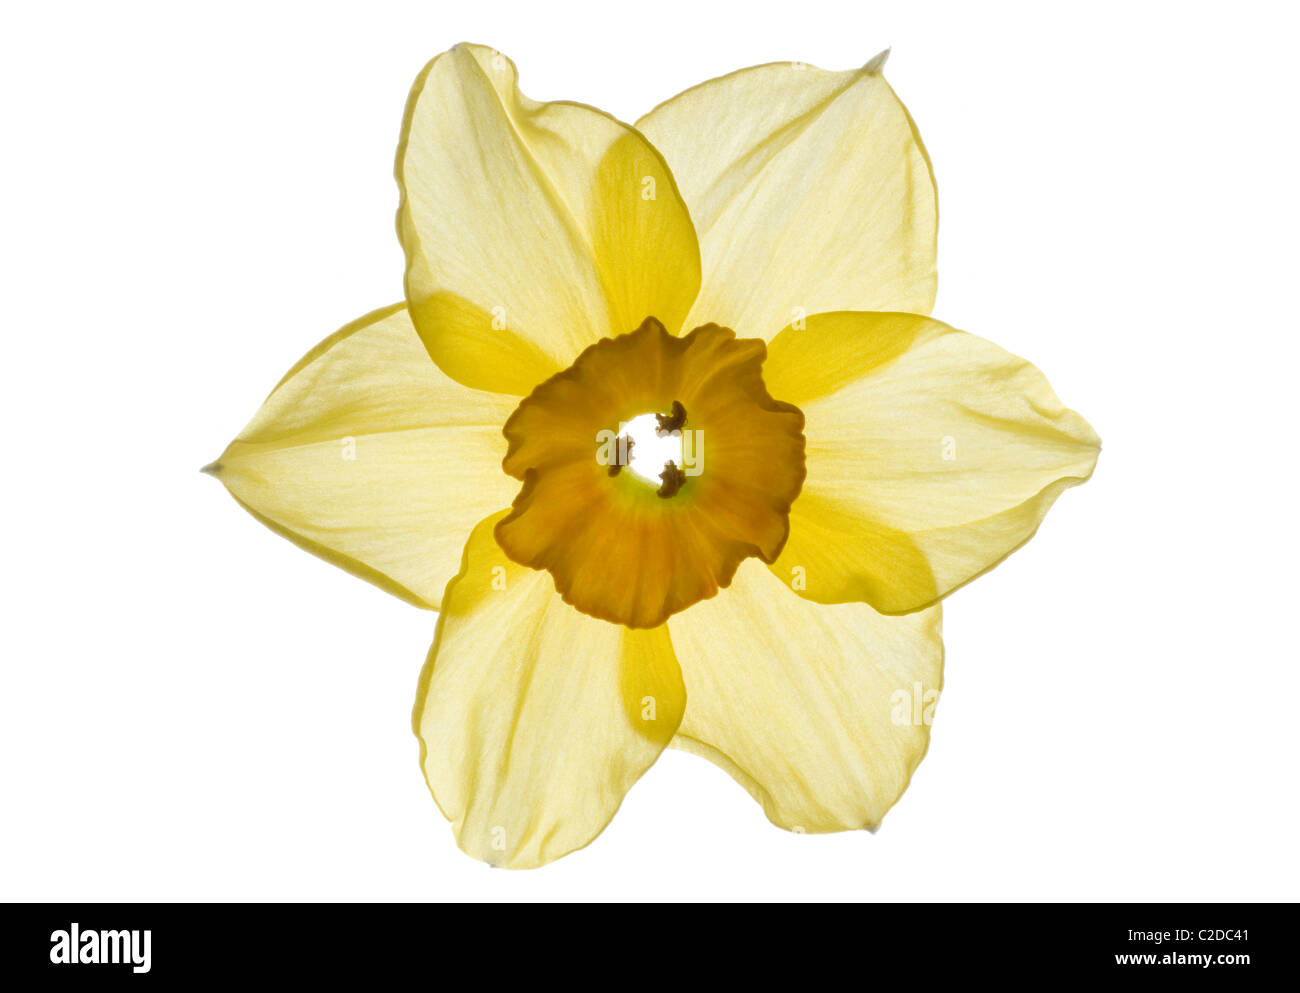 Back lit image of a daffodil flower Stock Photo